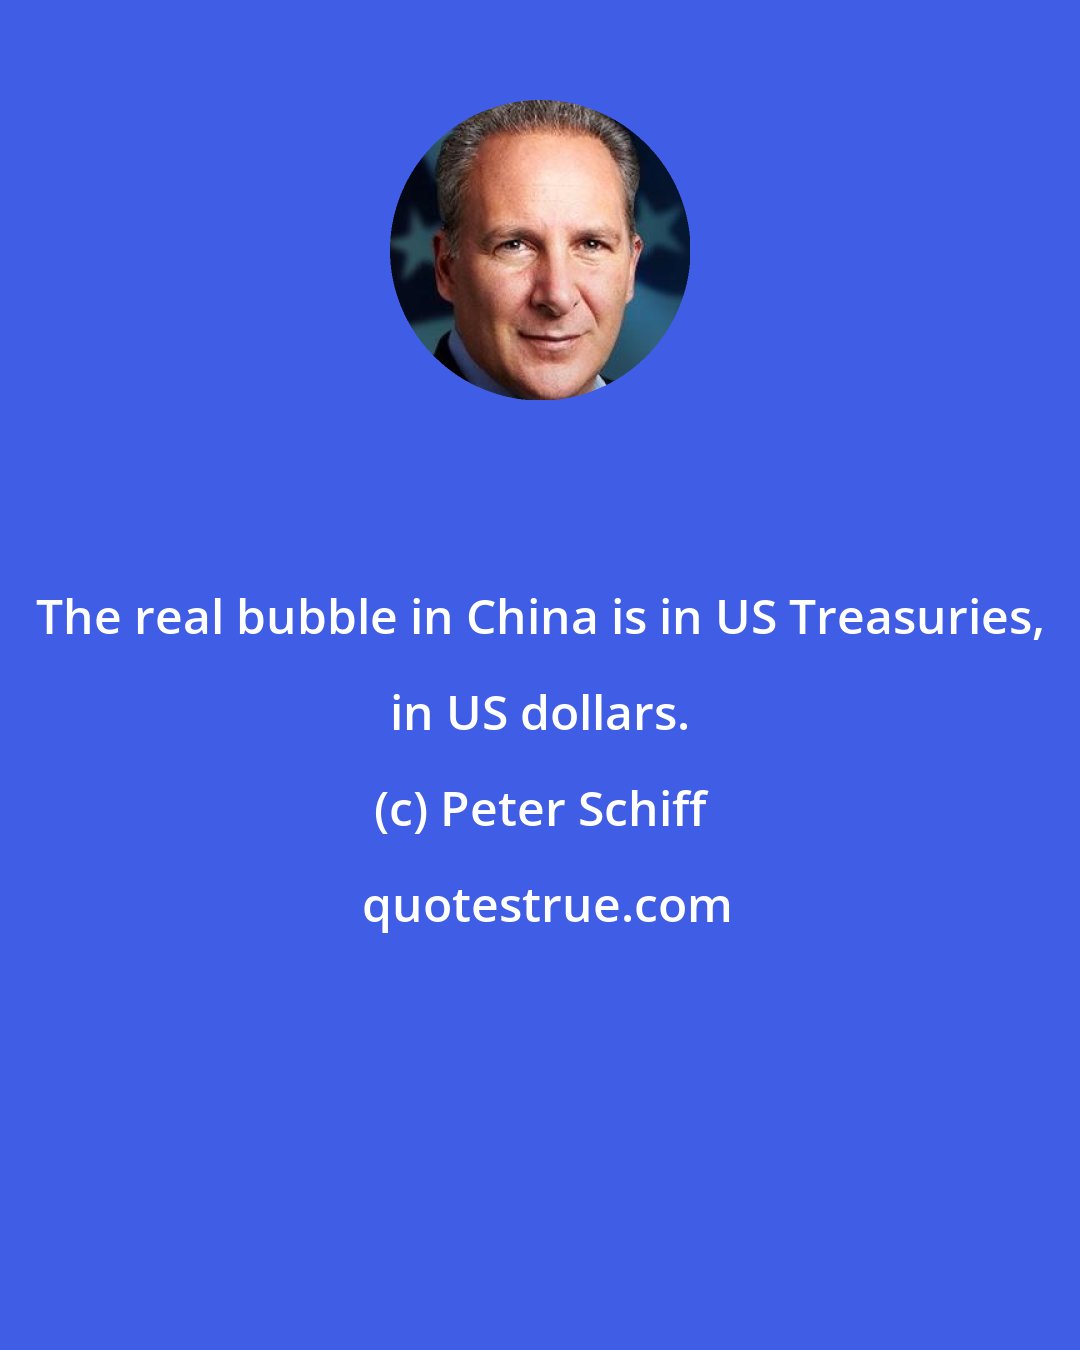 Peter Schiff: The real bubble in China is in US Treasuries, in US dollars.